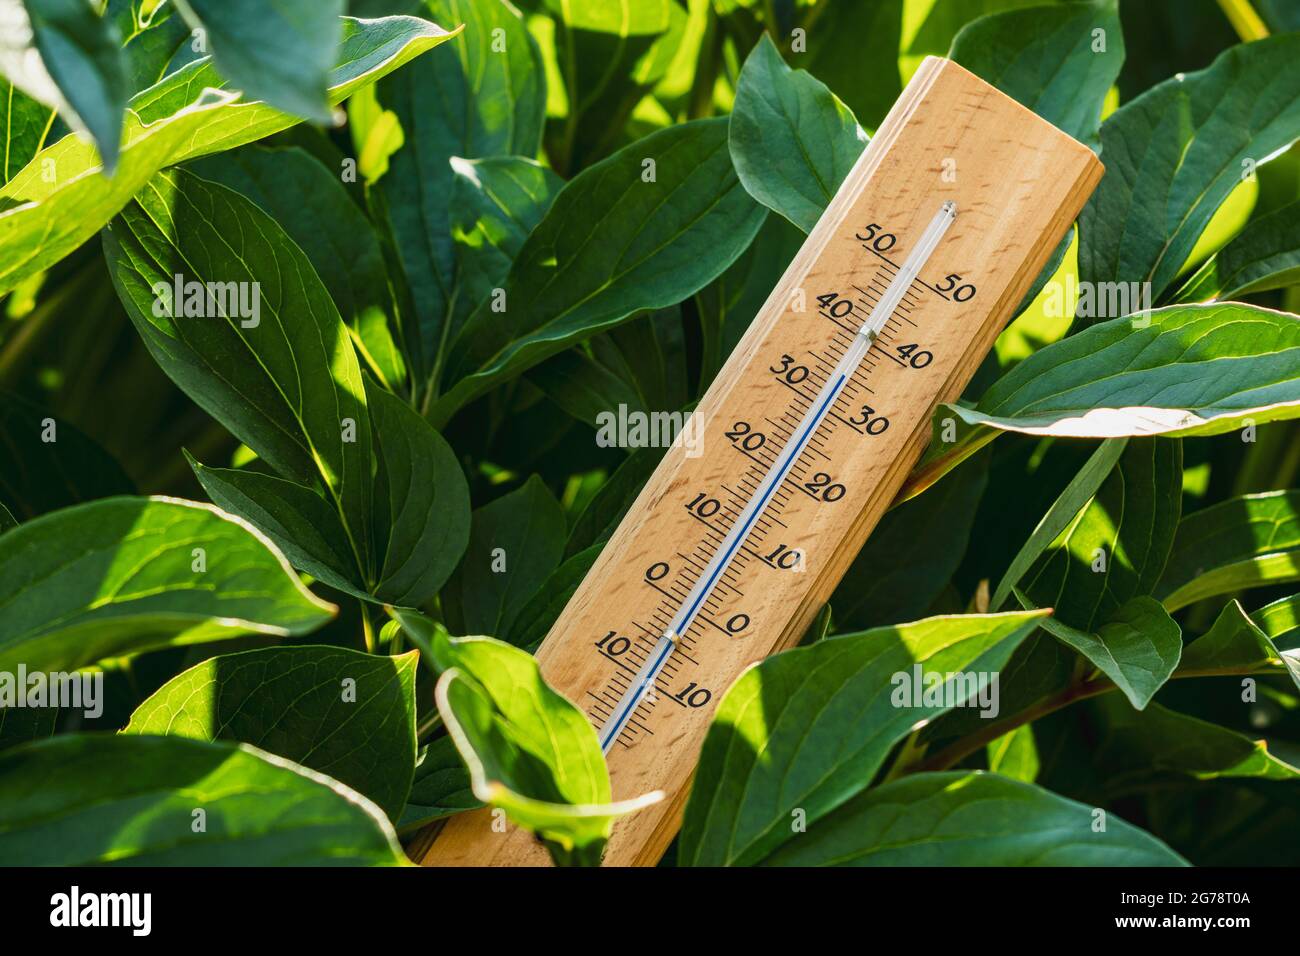 Thermometer between garden plants. Thermometer shows very hot